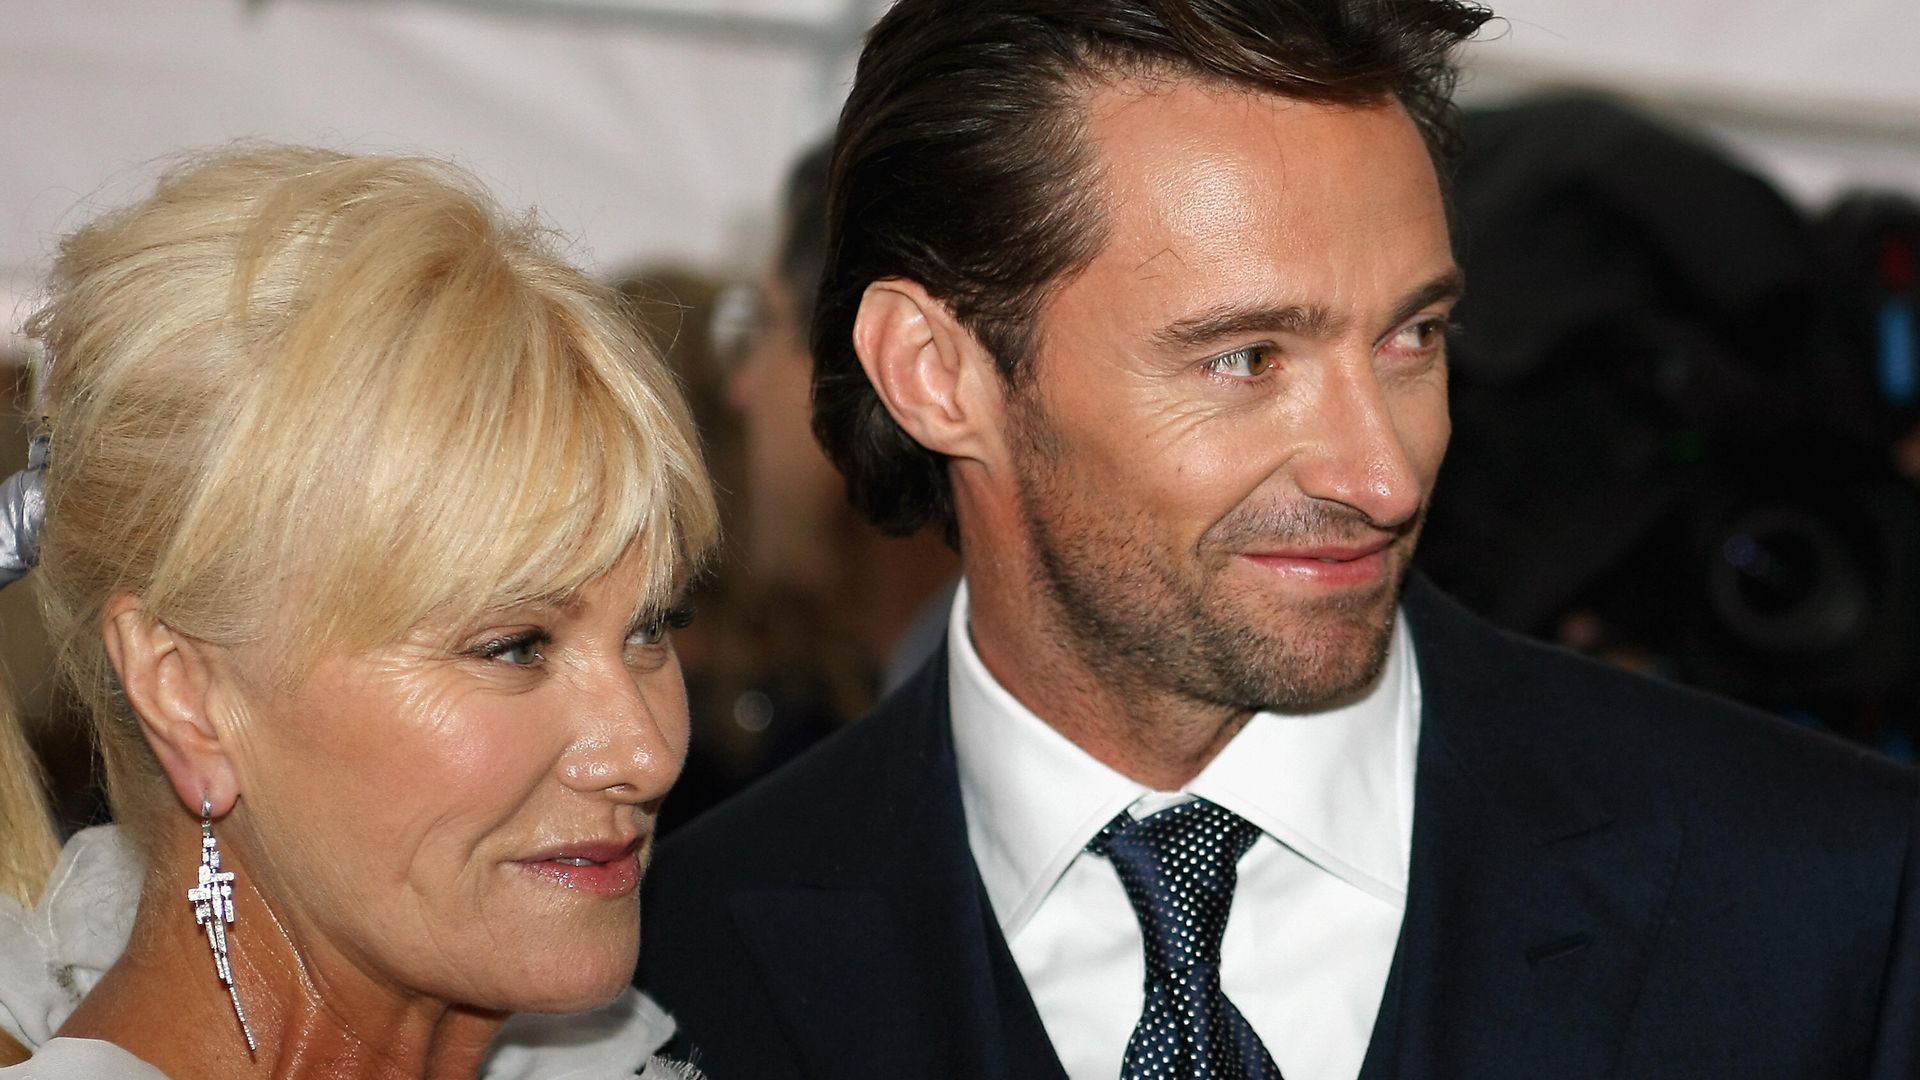 Hugh Jackman in a suit and his wife Deborah-Lee Furness in white at the premier of Australia in 2008